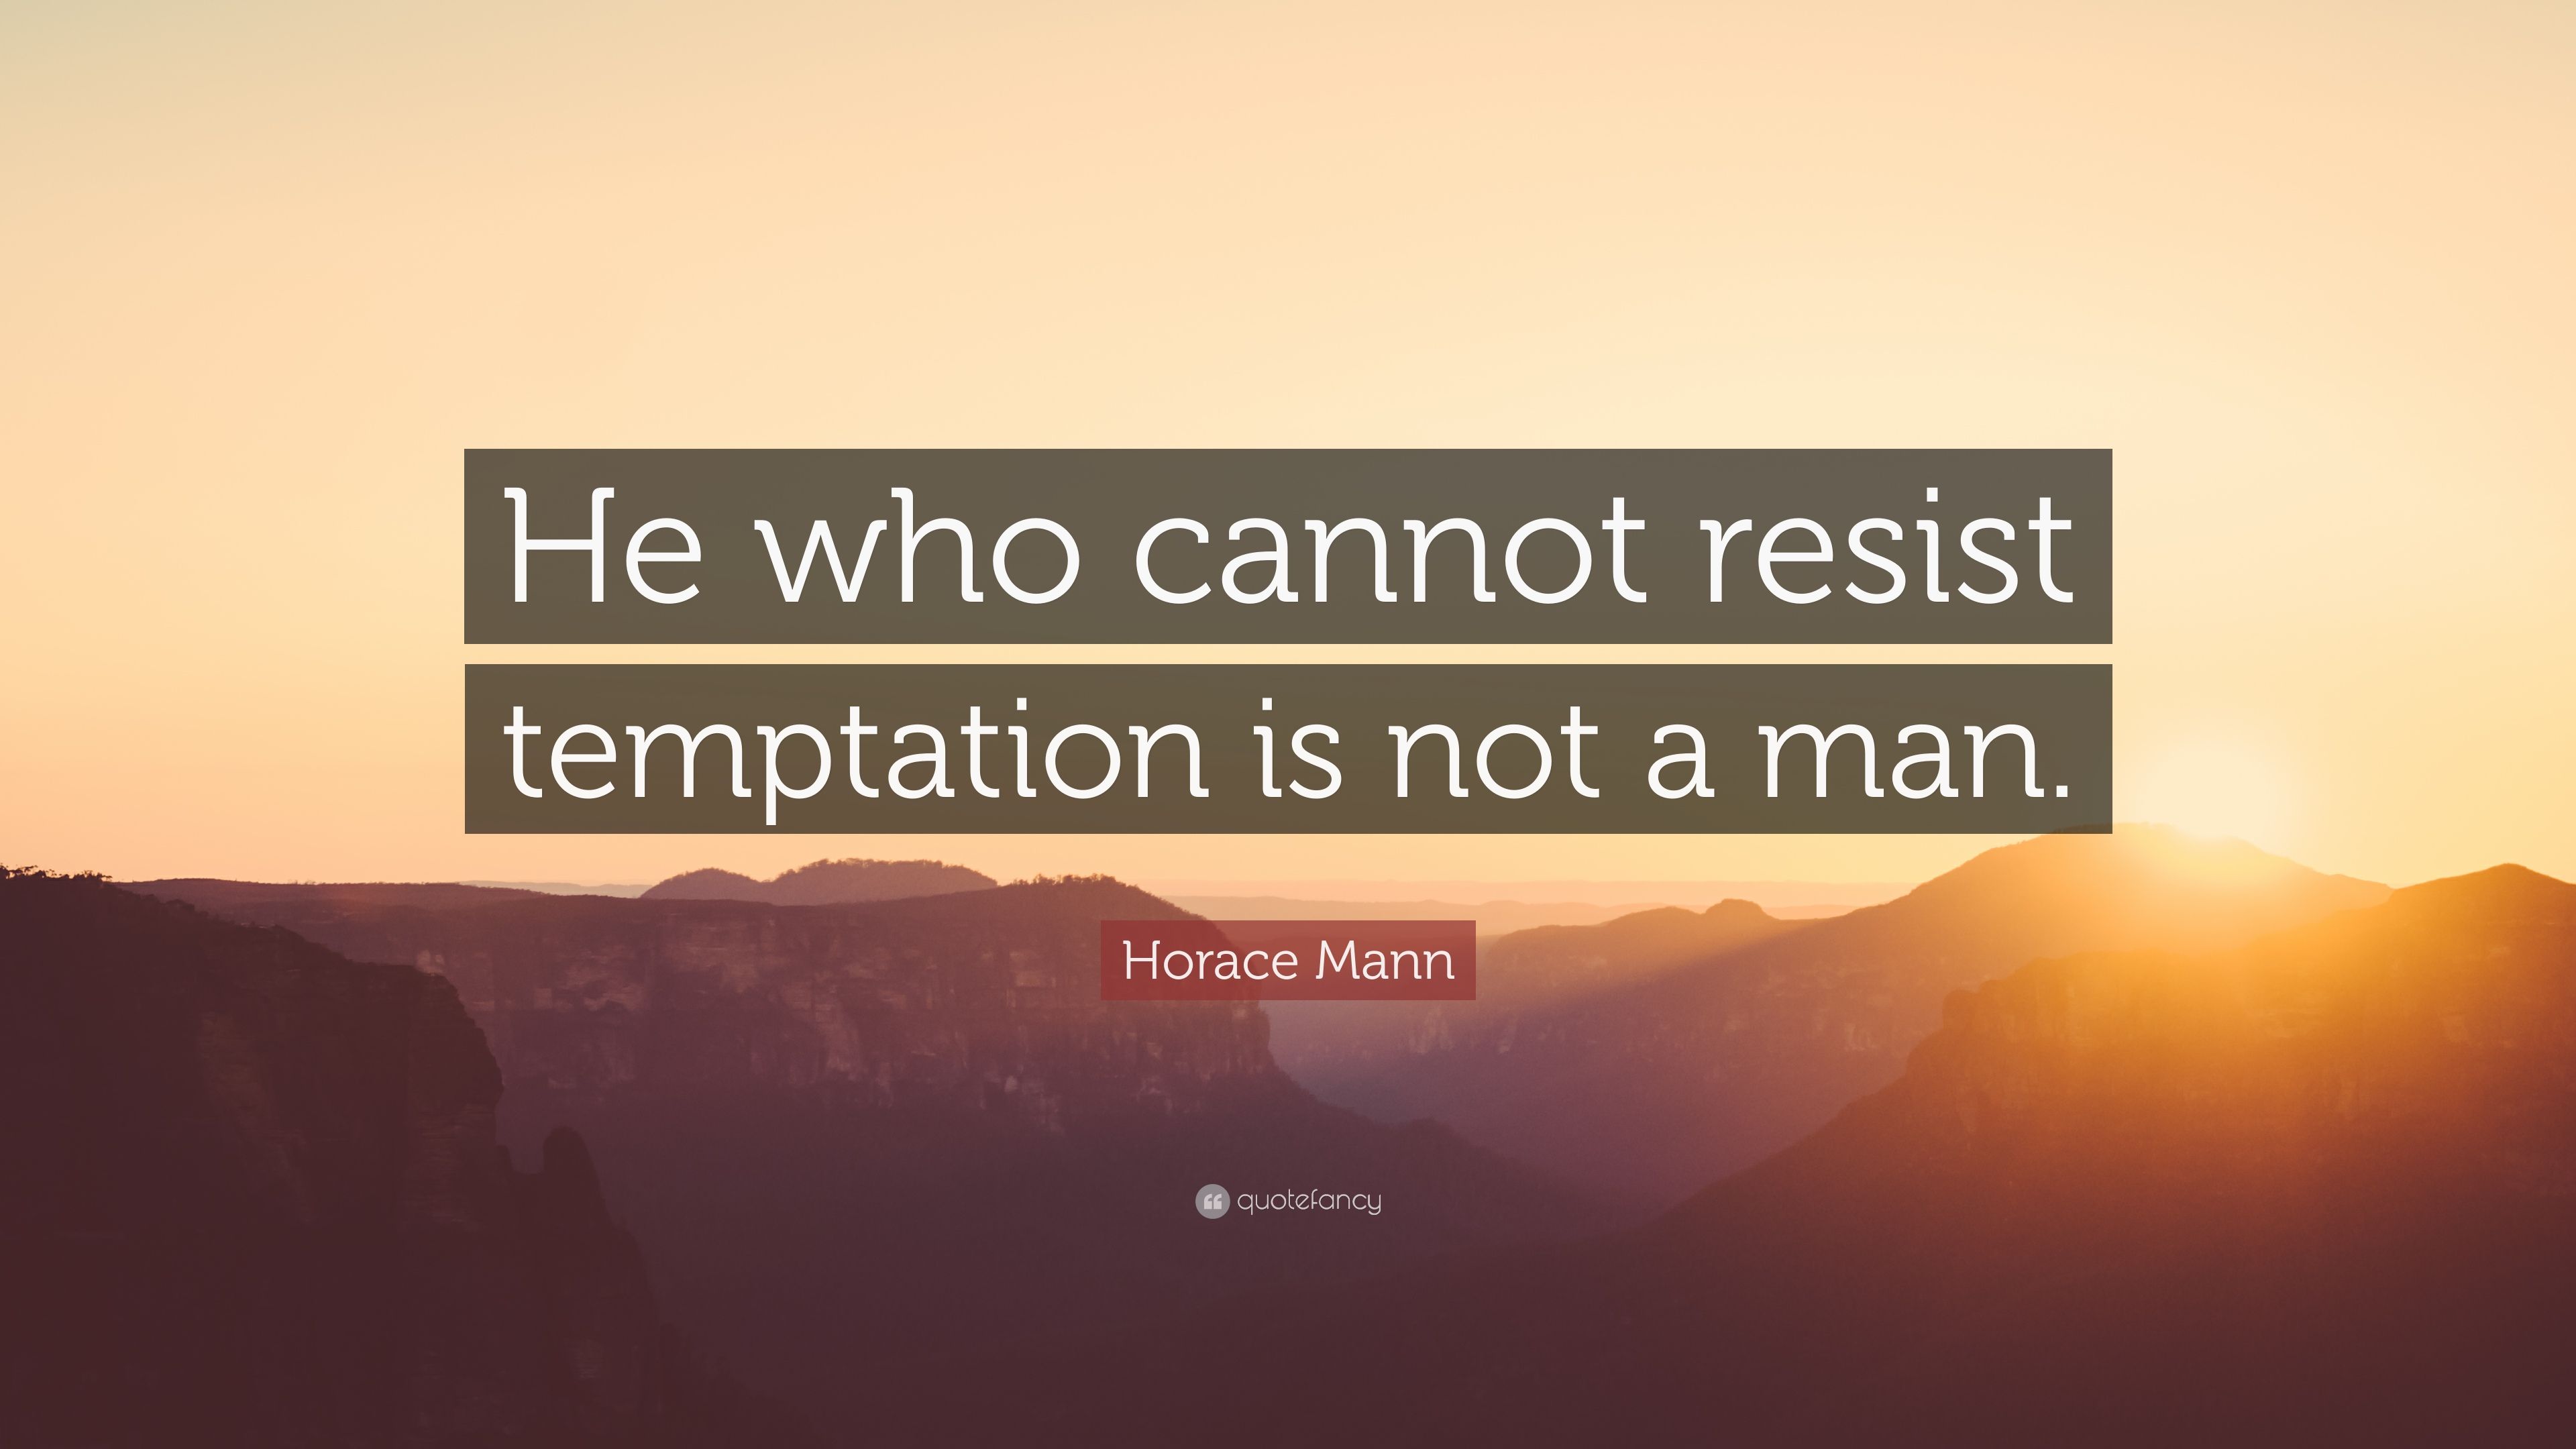 Horace Mann Quote: “He who cannot resist temptation is not a man.” (9 wallpaper)